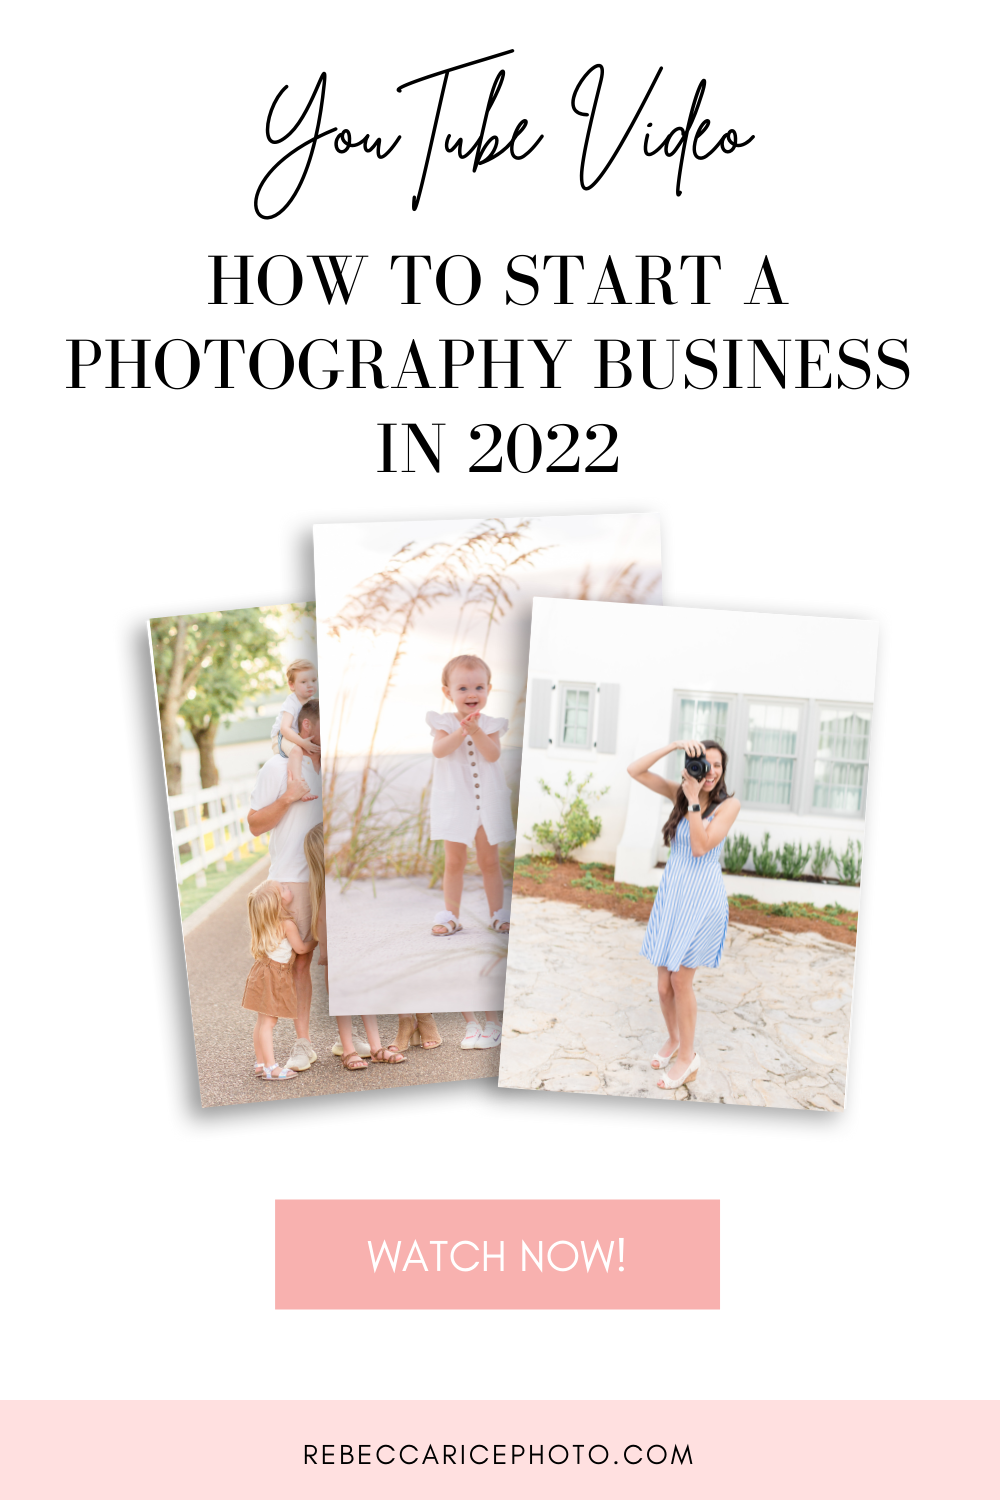 How to start a photography business in 2022